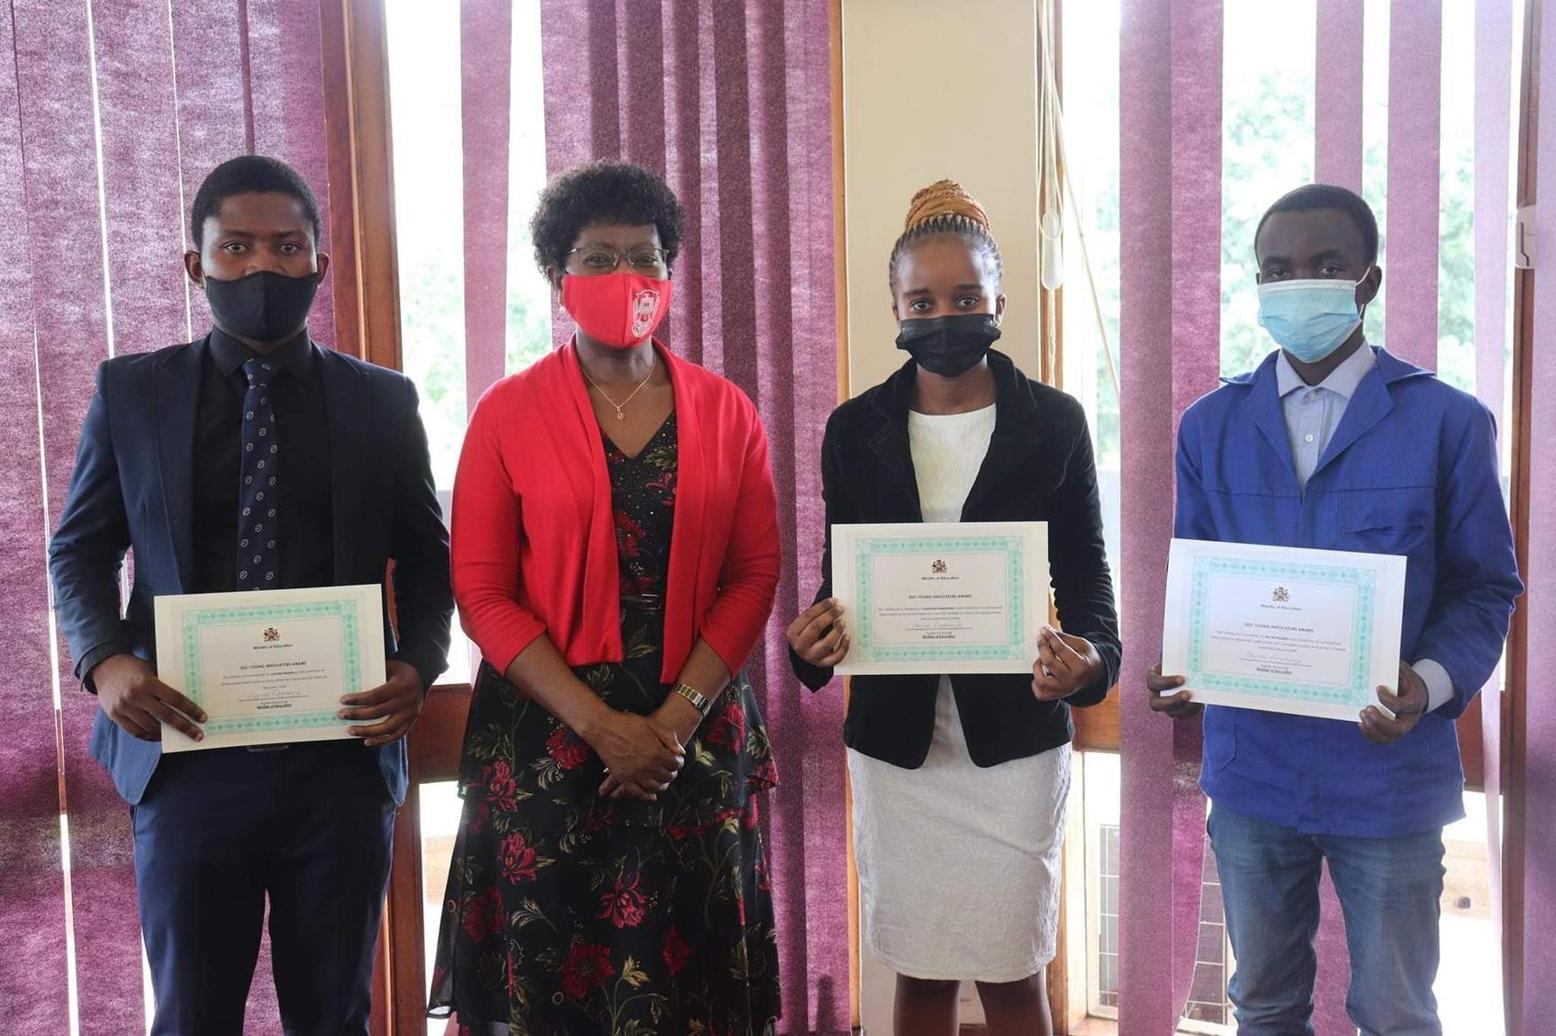 Ministry of Education awards three young people